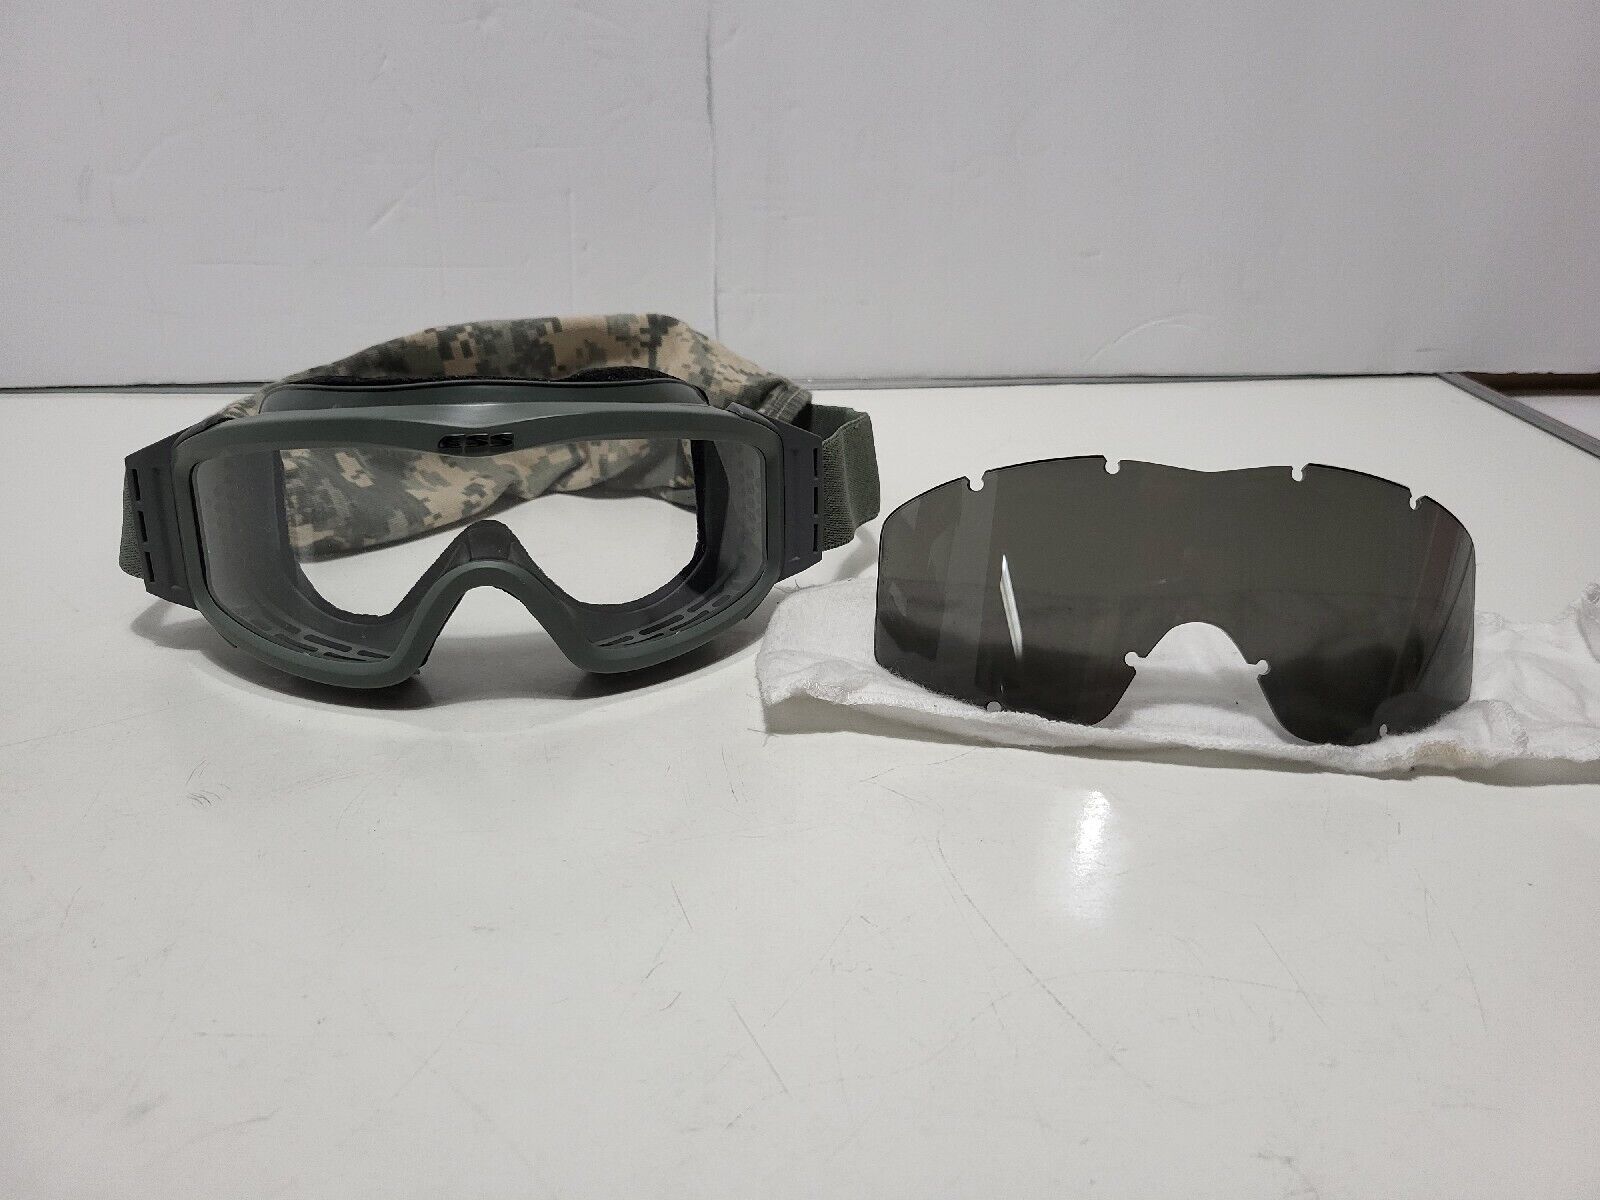 Military ESS Goggles NVG Profile w/ clear and smoke lenses